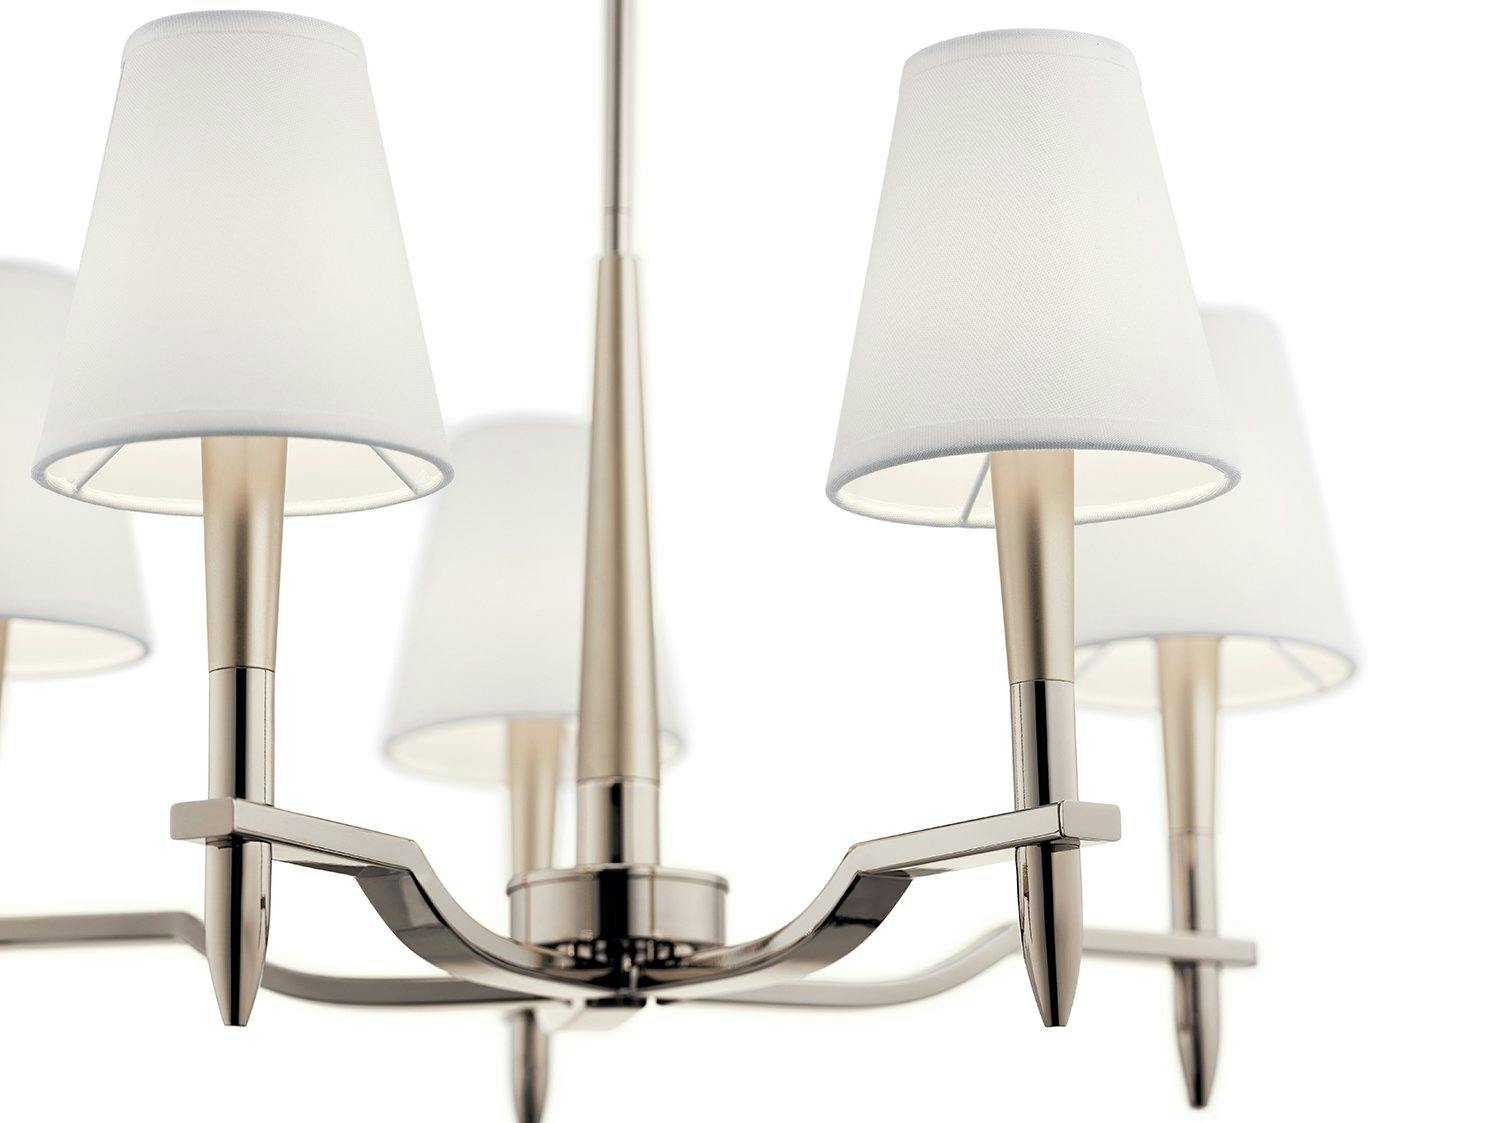 Close up view of the Kinsey 5 Light Chandelier Polished Nickel on a white background